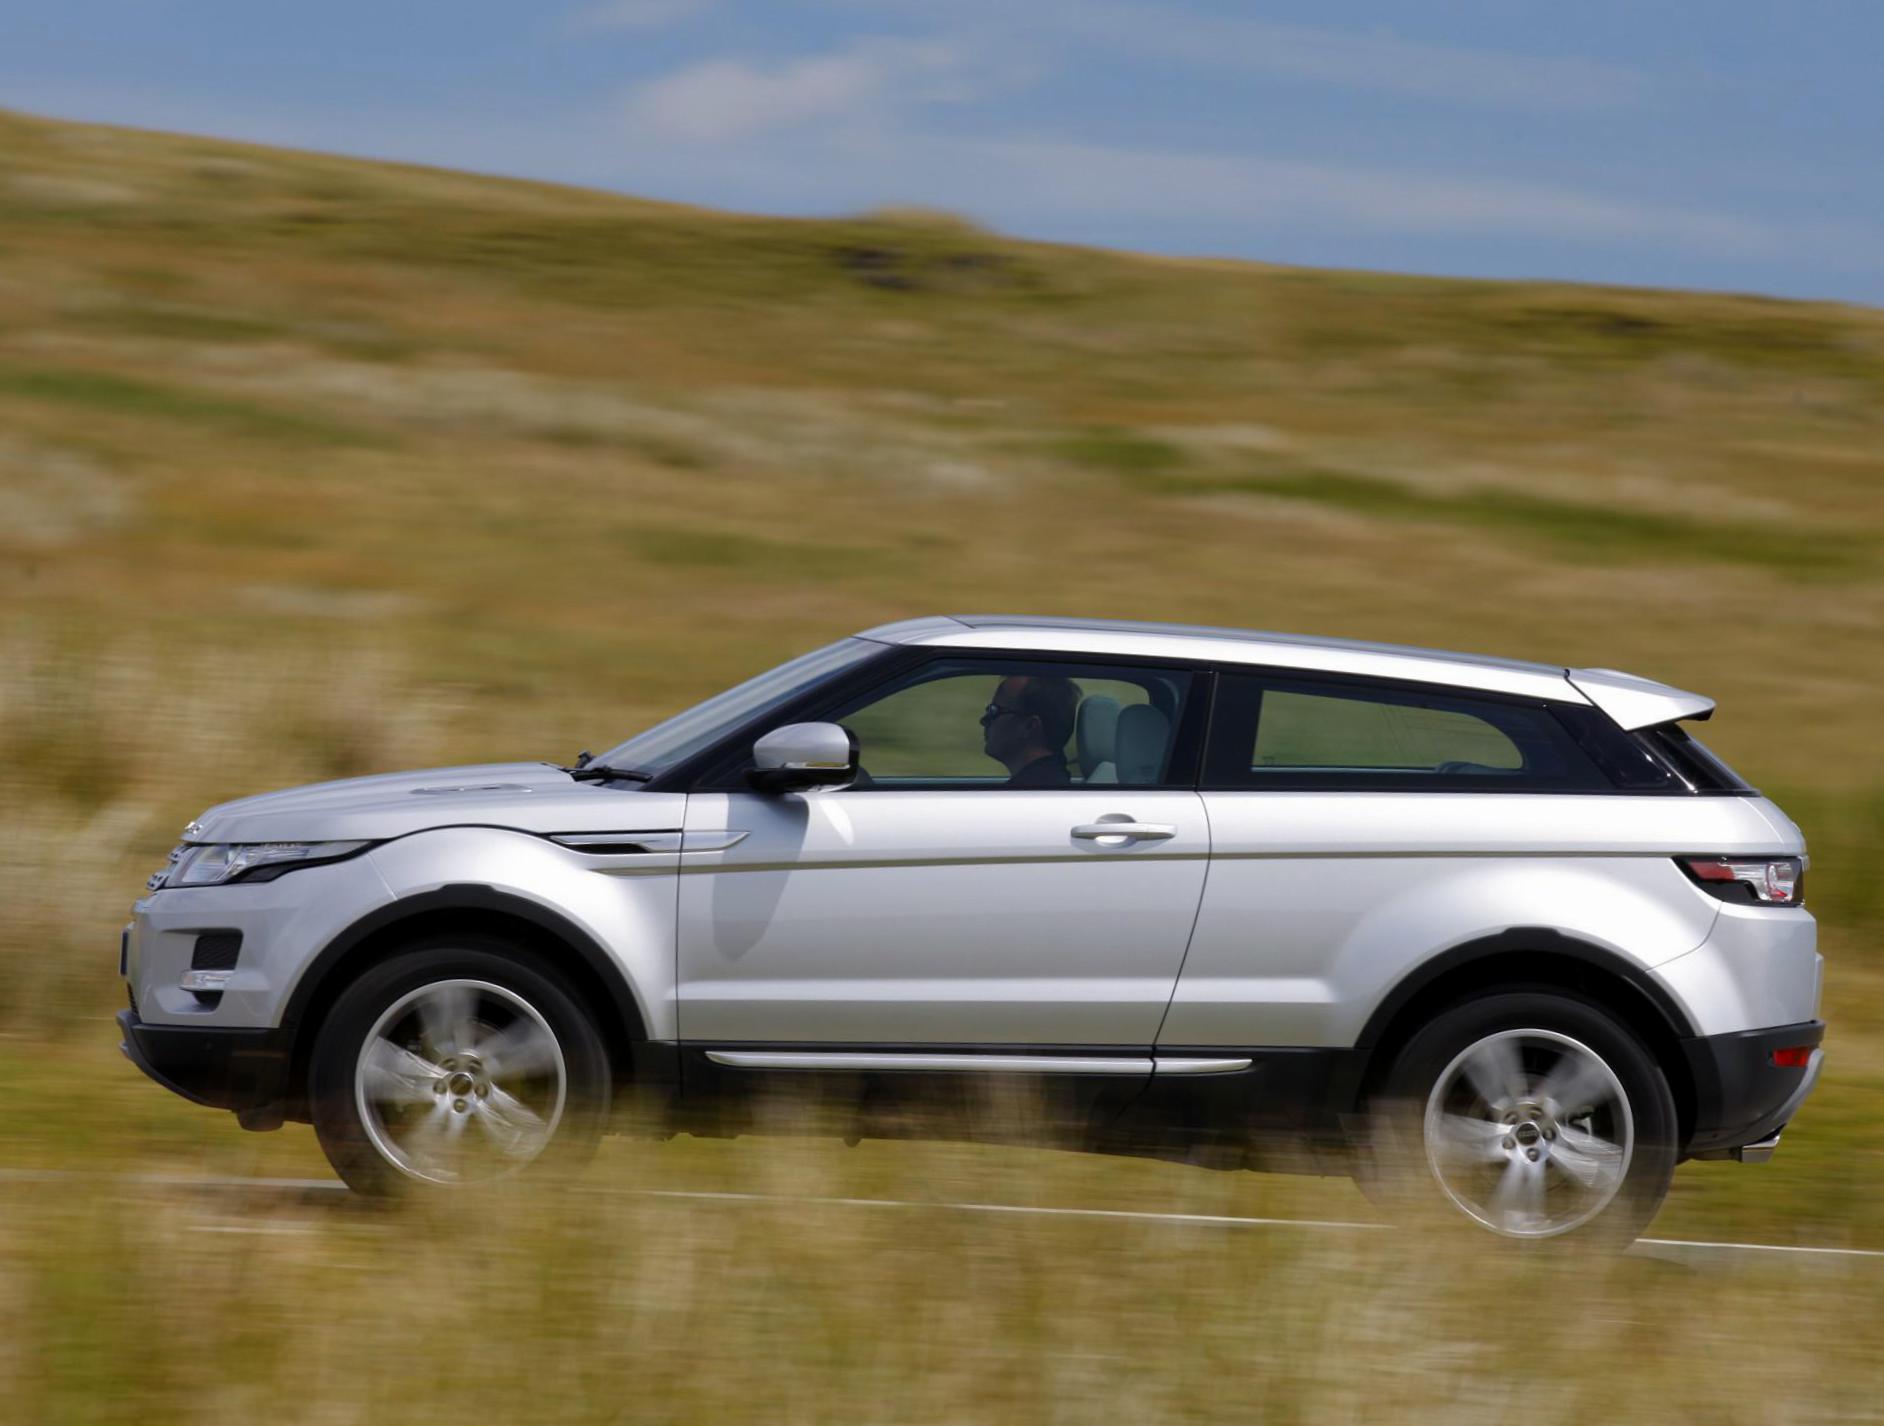 Land Rover Range Rover Evoque Coupe Specifications suv